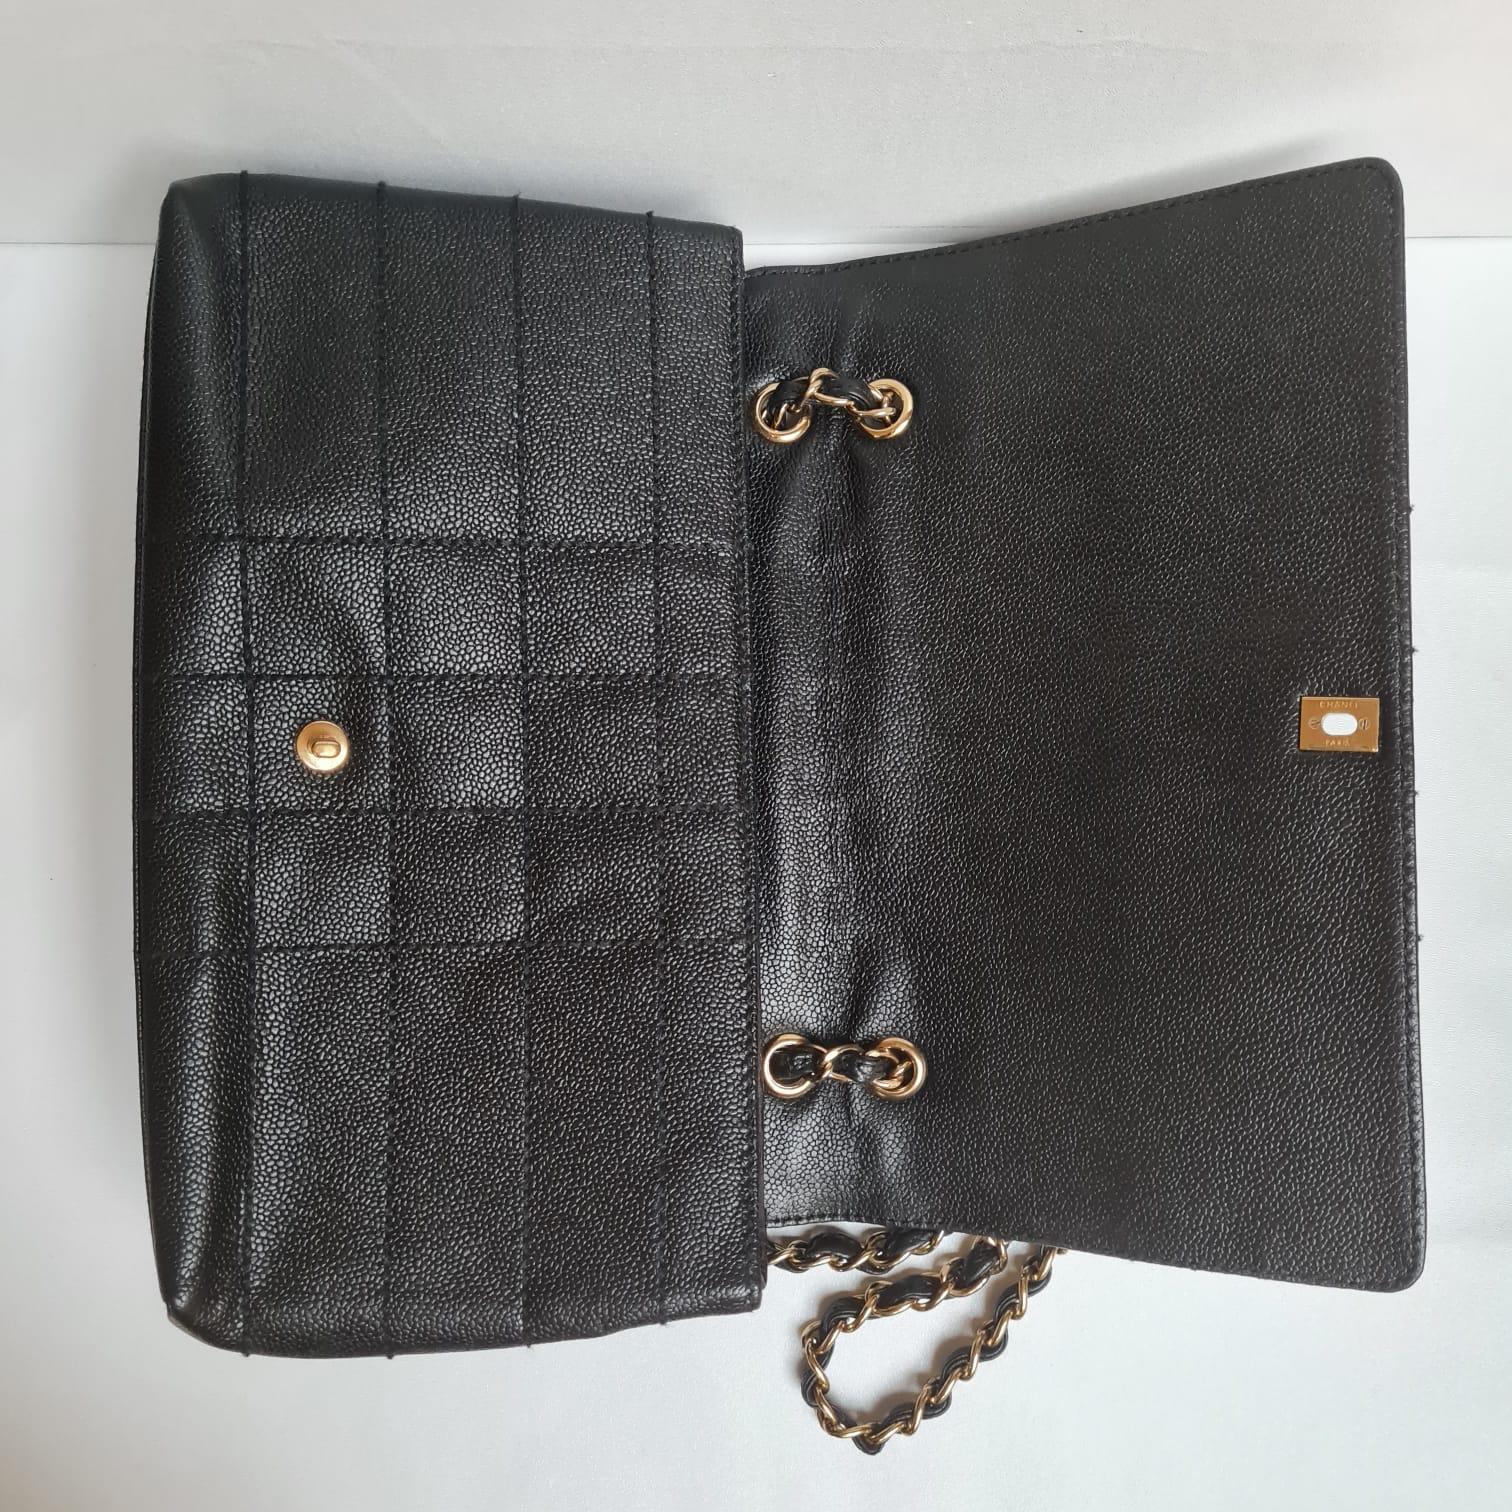 Chanel Black Caviar Square Quilted Flap Bag In Good Condition For Sale In Jakarta, Daerah Khusus Ibukota Jakarta